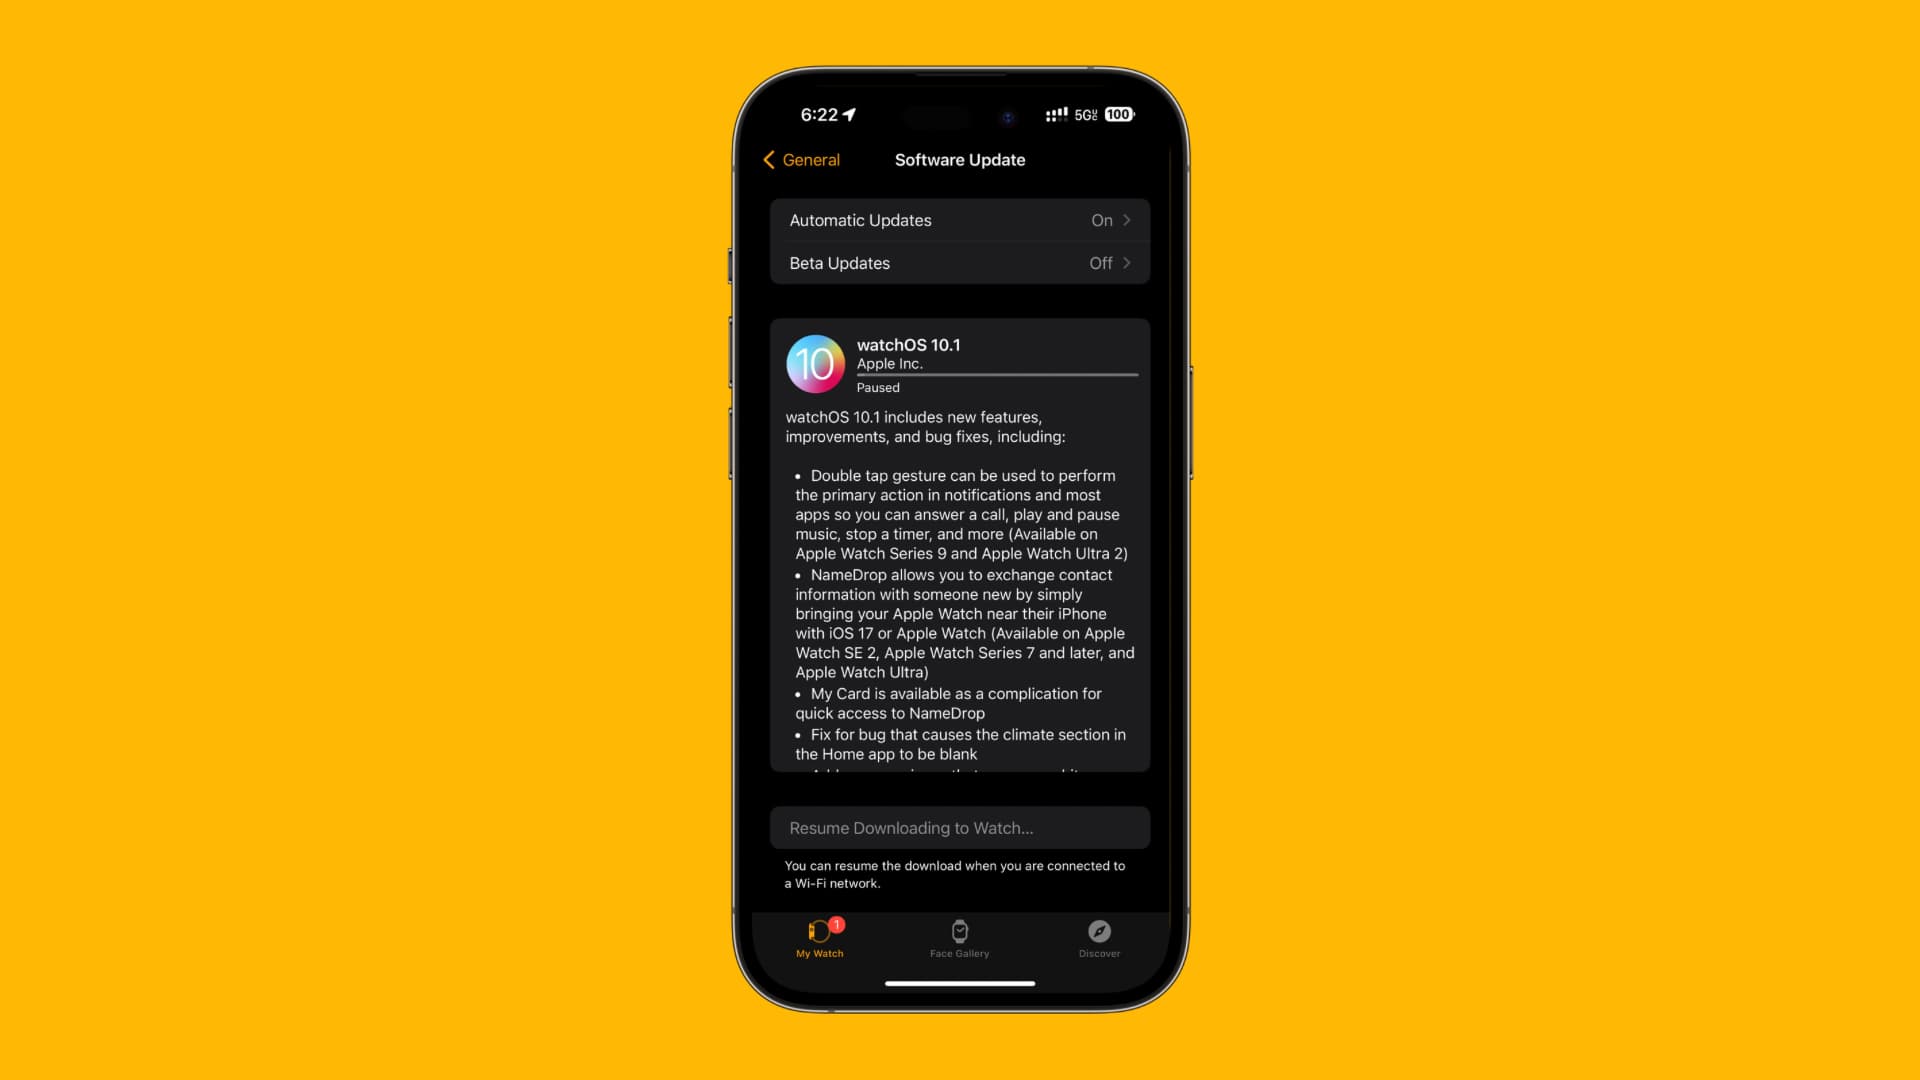 watchOS 10.1 brings Double Tap & NameDrop to select Apple Watches, fixes tons of bugs